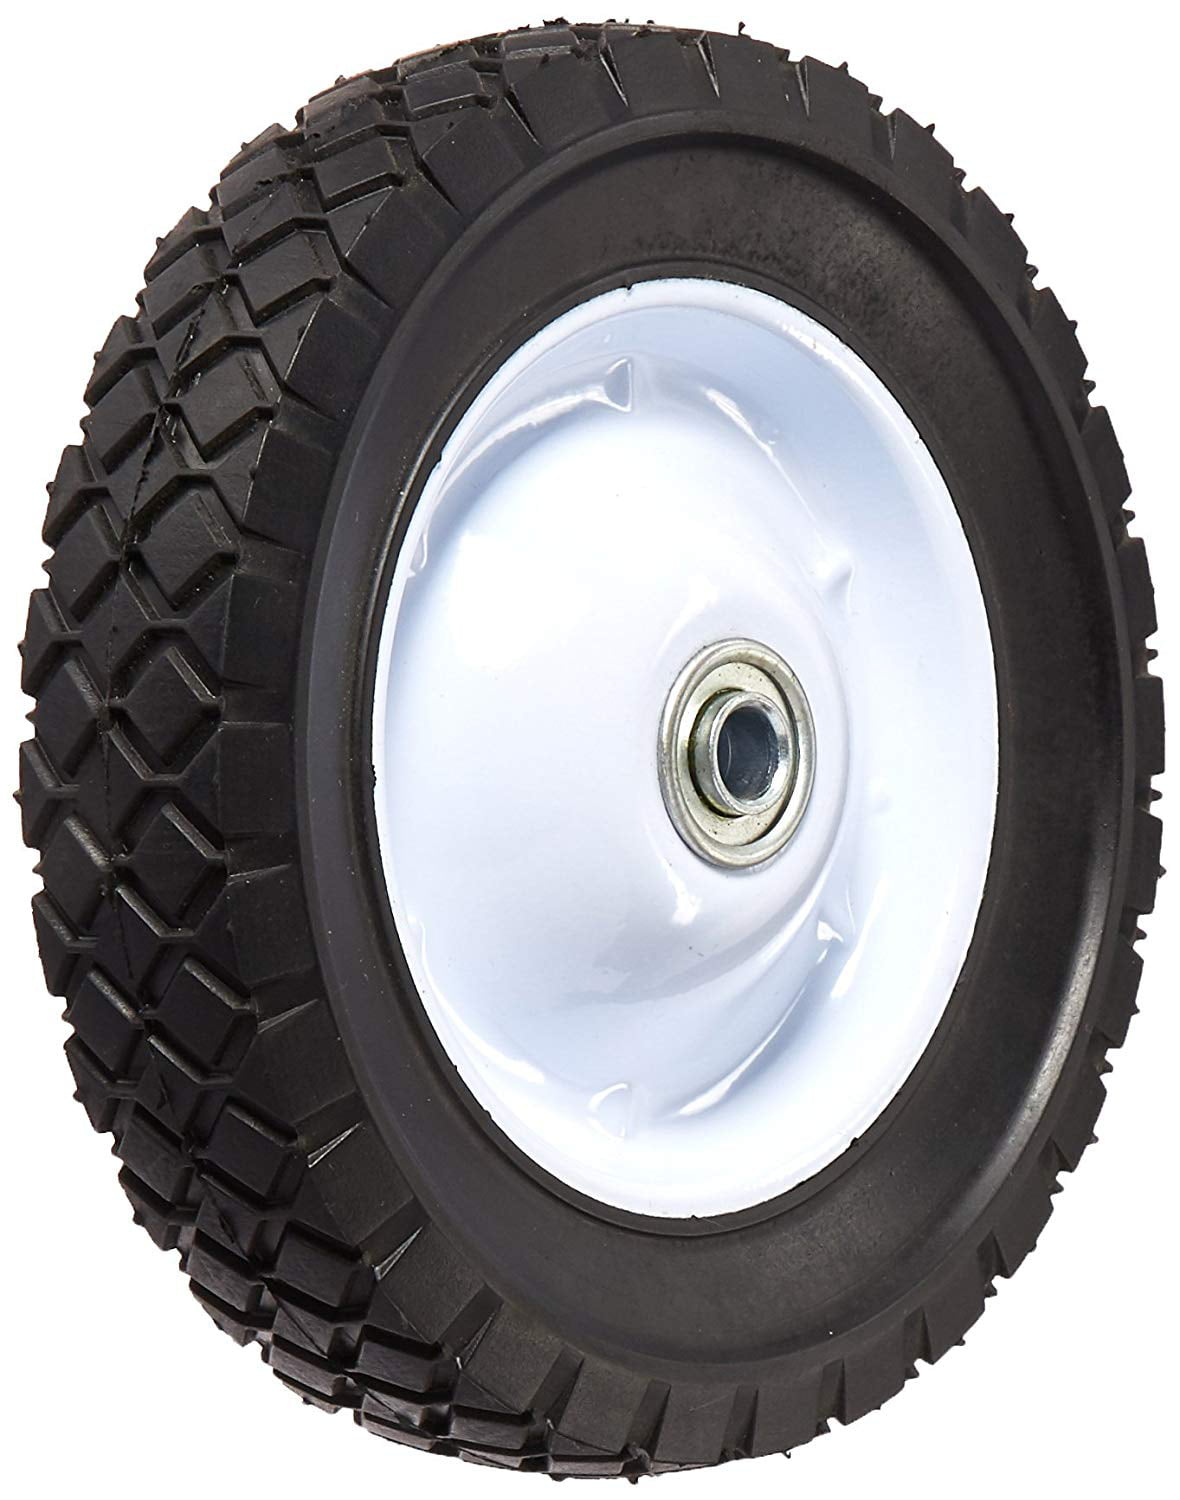 335180 8-Inch by 1-3/4-Inch Steel Lawn Mower Wheel, Replacement tires